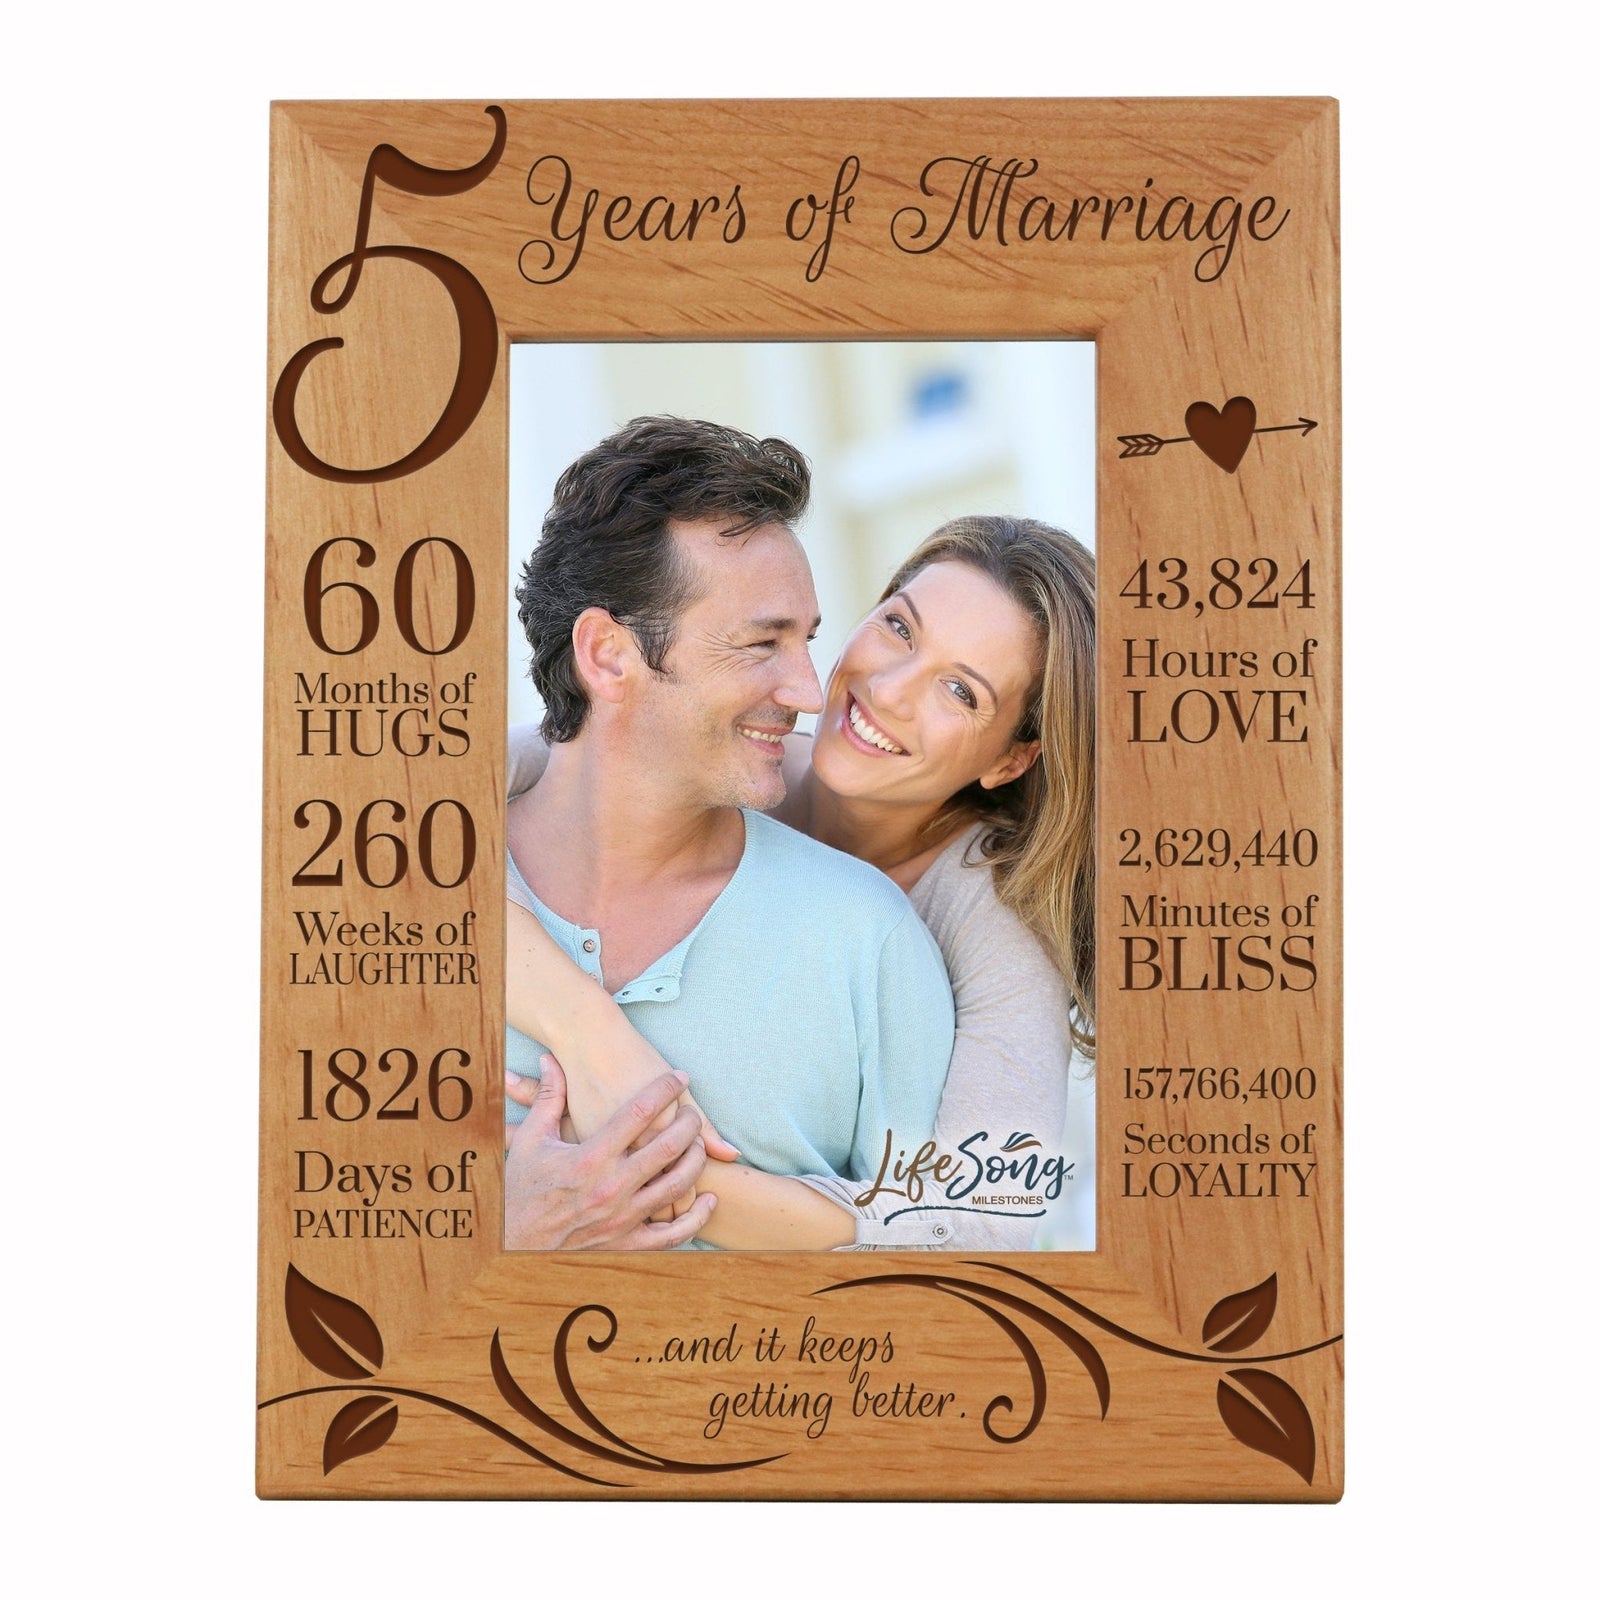 Engraved 5th Wedding Anniversary Photo Frame Wall Decor Gift for Couples - Keeps Getting Better - LifeSong Milestones